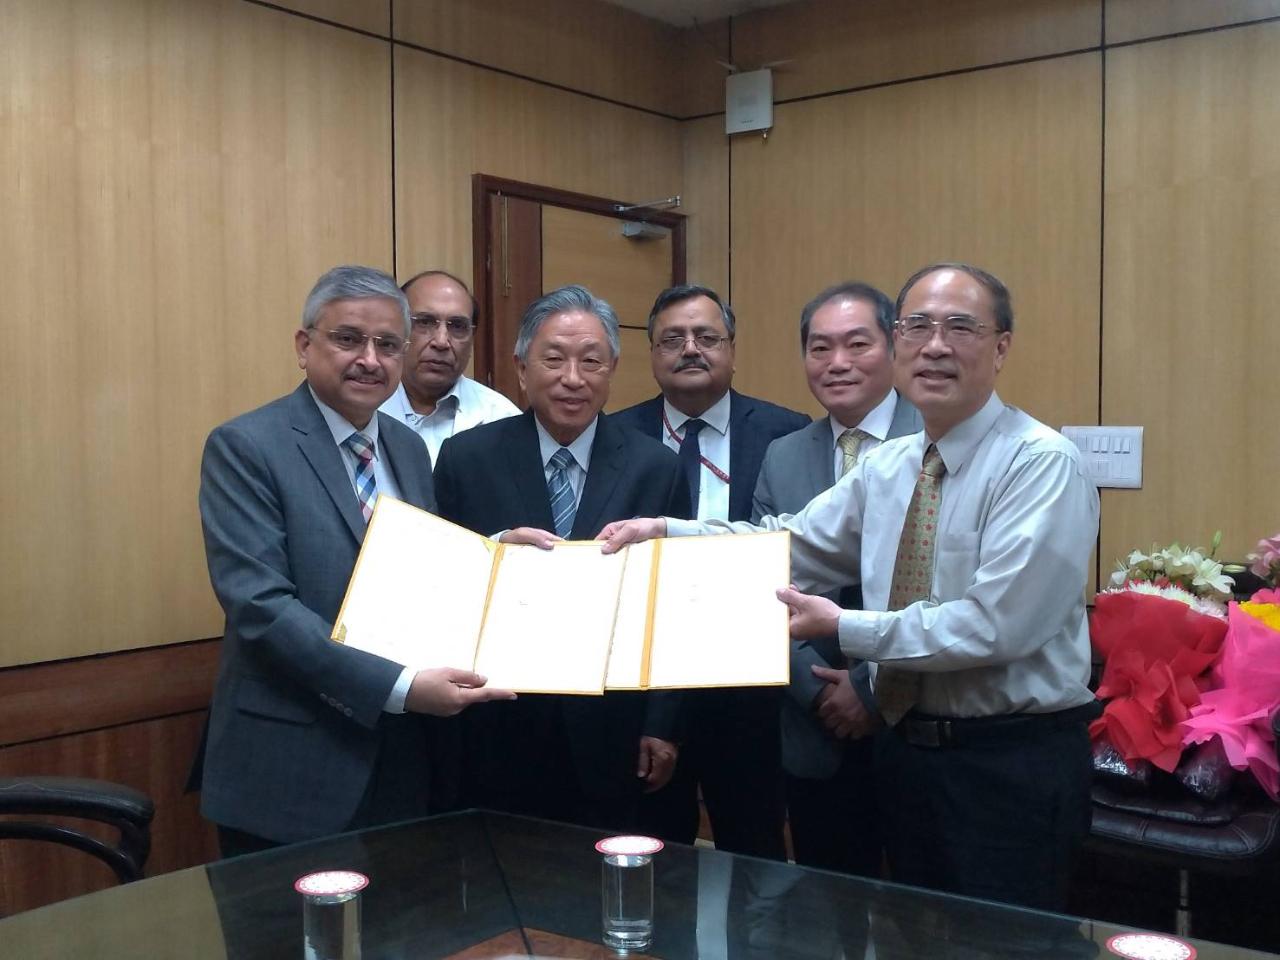 Amb. Tien(Front Left 2), Prof. Randeep Guleria (Front Left 1), Dr. Kuo(Front Right 1) attended the Signing Ceremony.